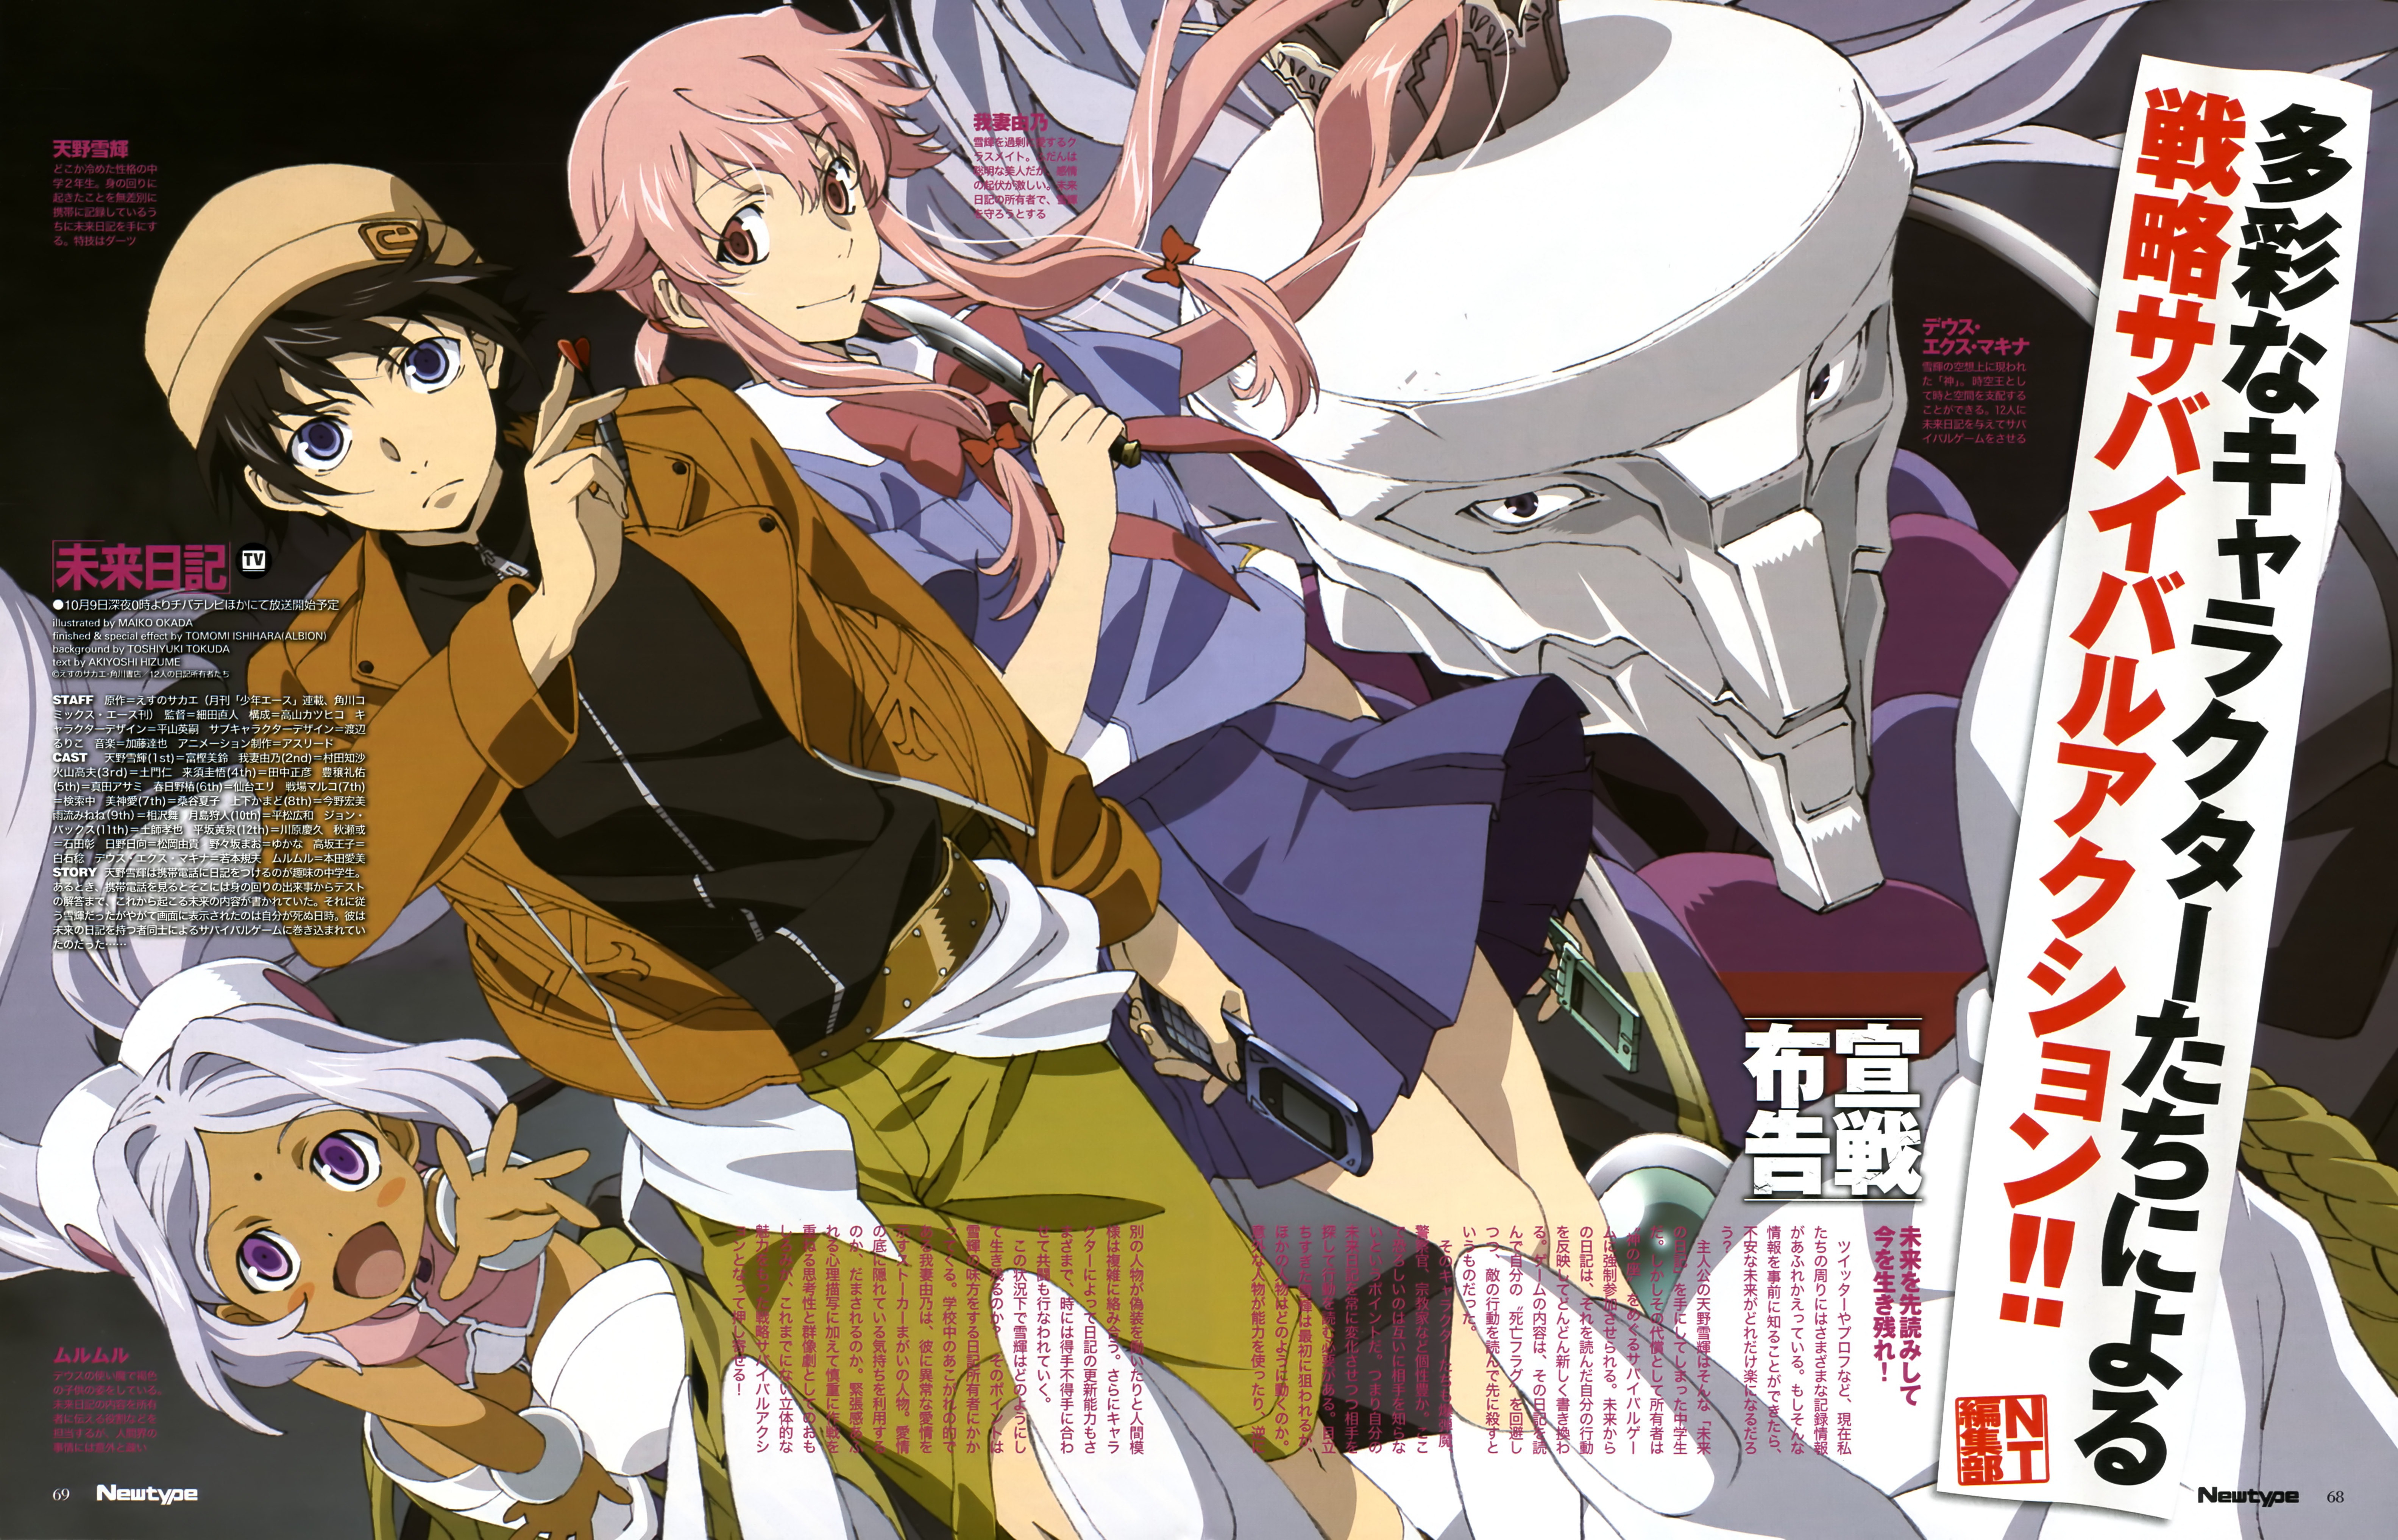 Characters appearing in Future Diary Manga | Anime-Planet